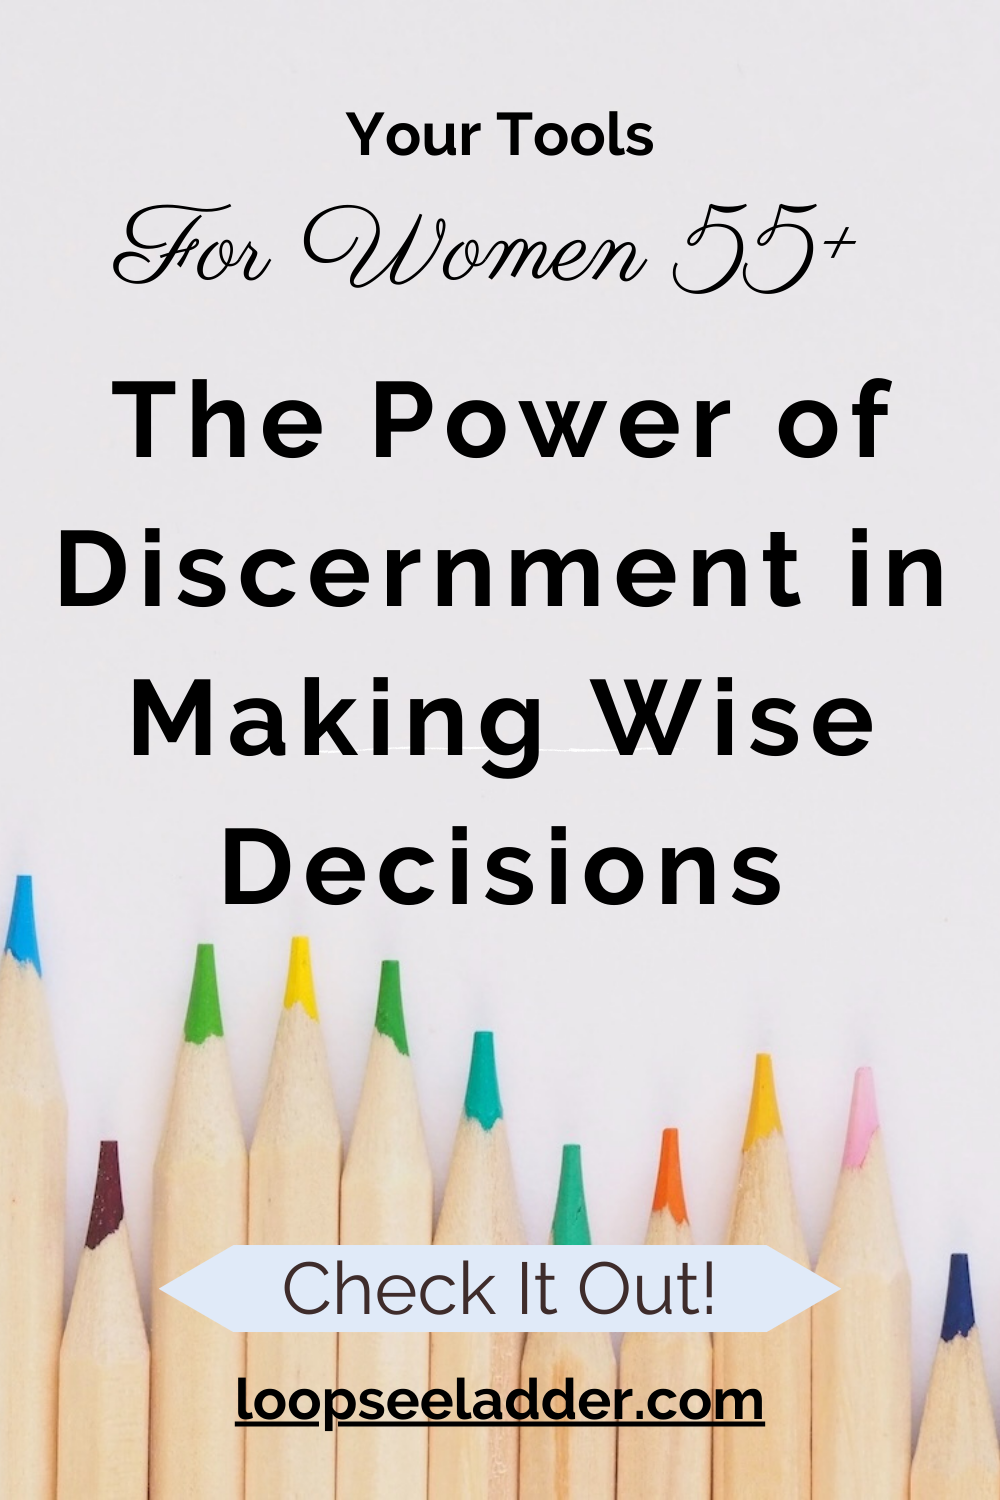 The Power of Discernment: How Women 55+ Are Mastering the Art of Making Wise Choices